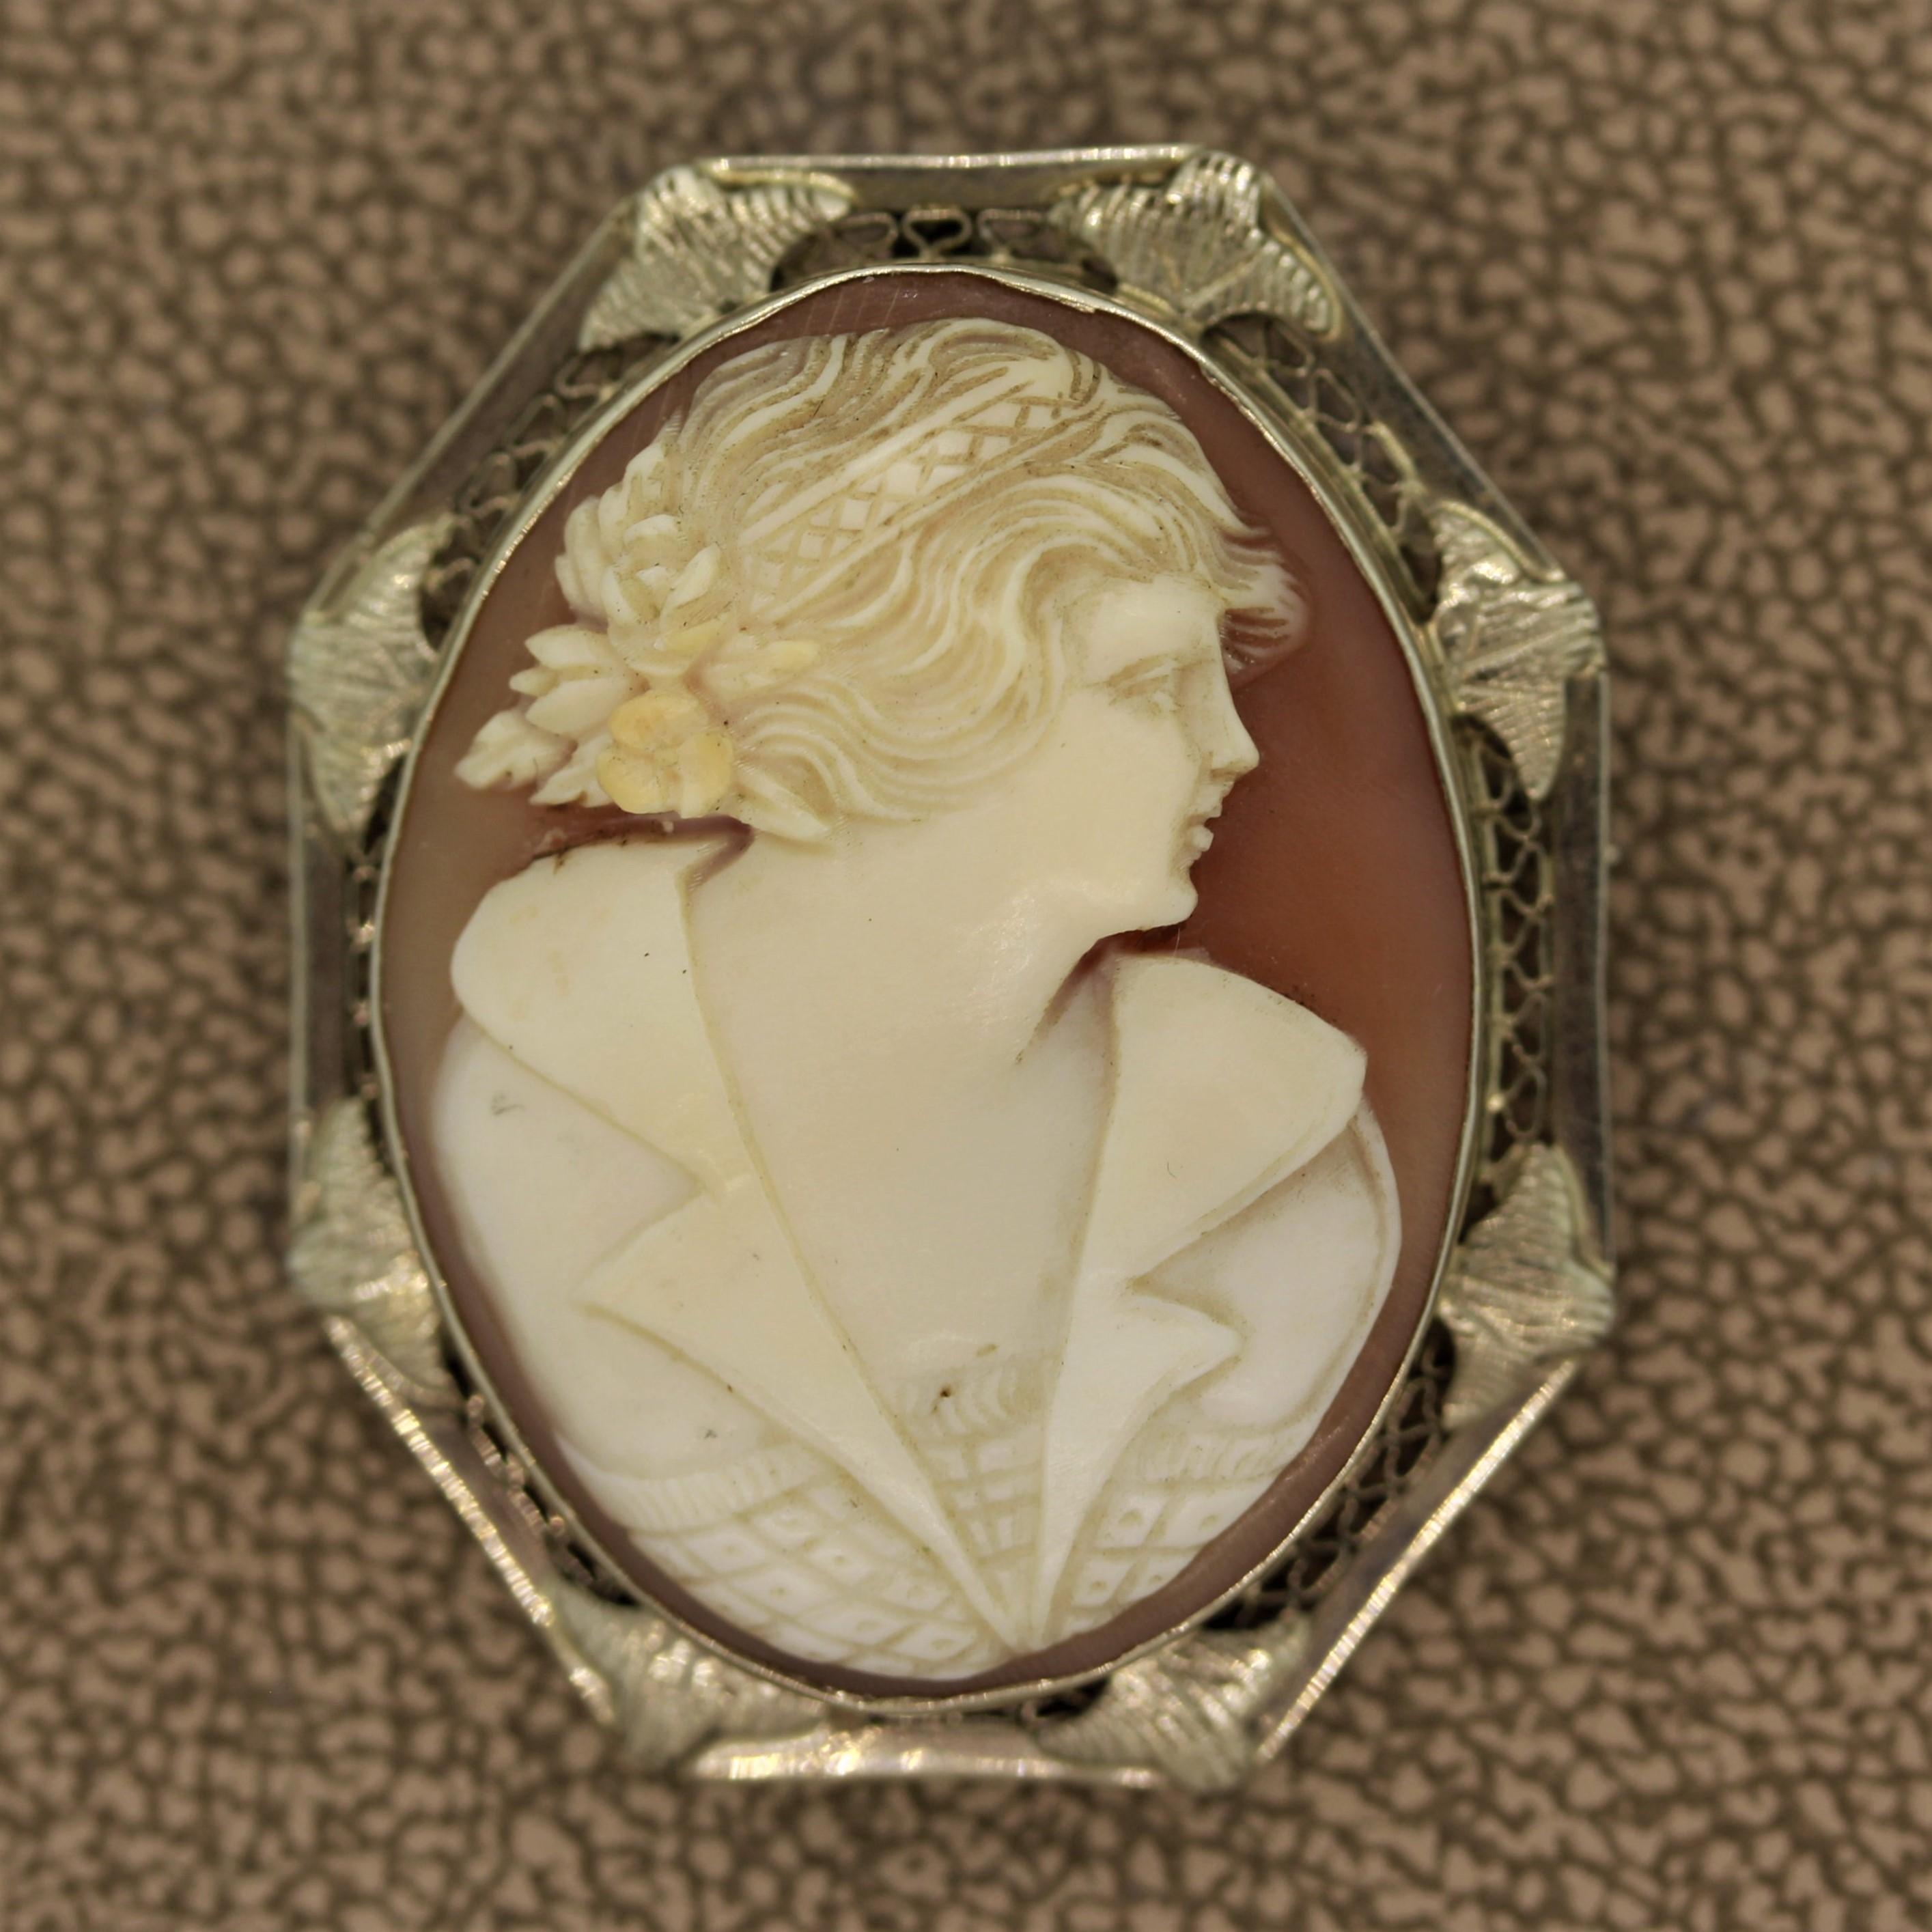 A classic cameo depicting a regal woman with a bouquet of flowers in her hair. The frame is made in 14k white gold with filigree made by hand. Can be worn as a brooch or attach a chain to the bail and wear it as a pendant.

 

Length: 1.3